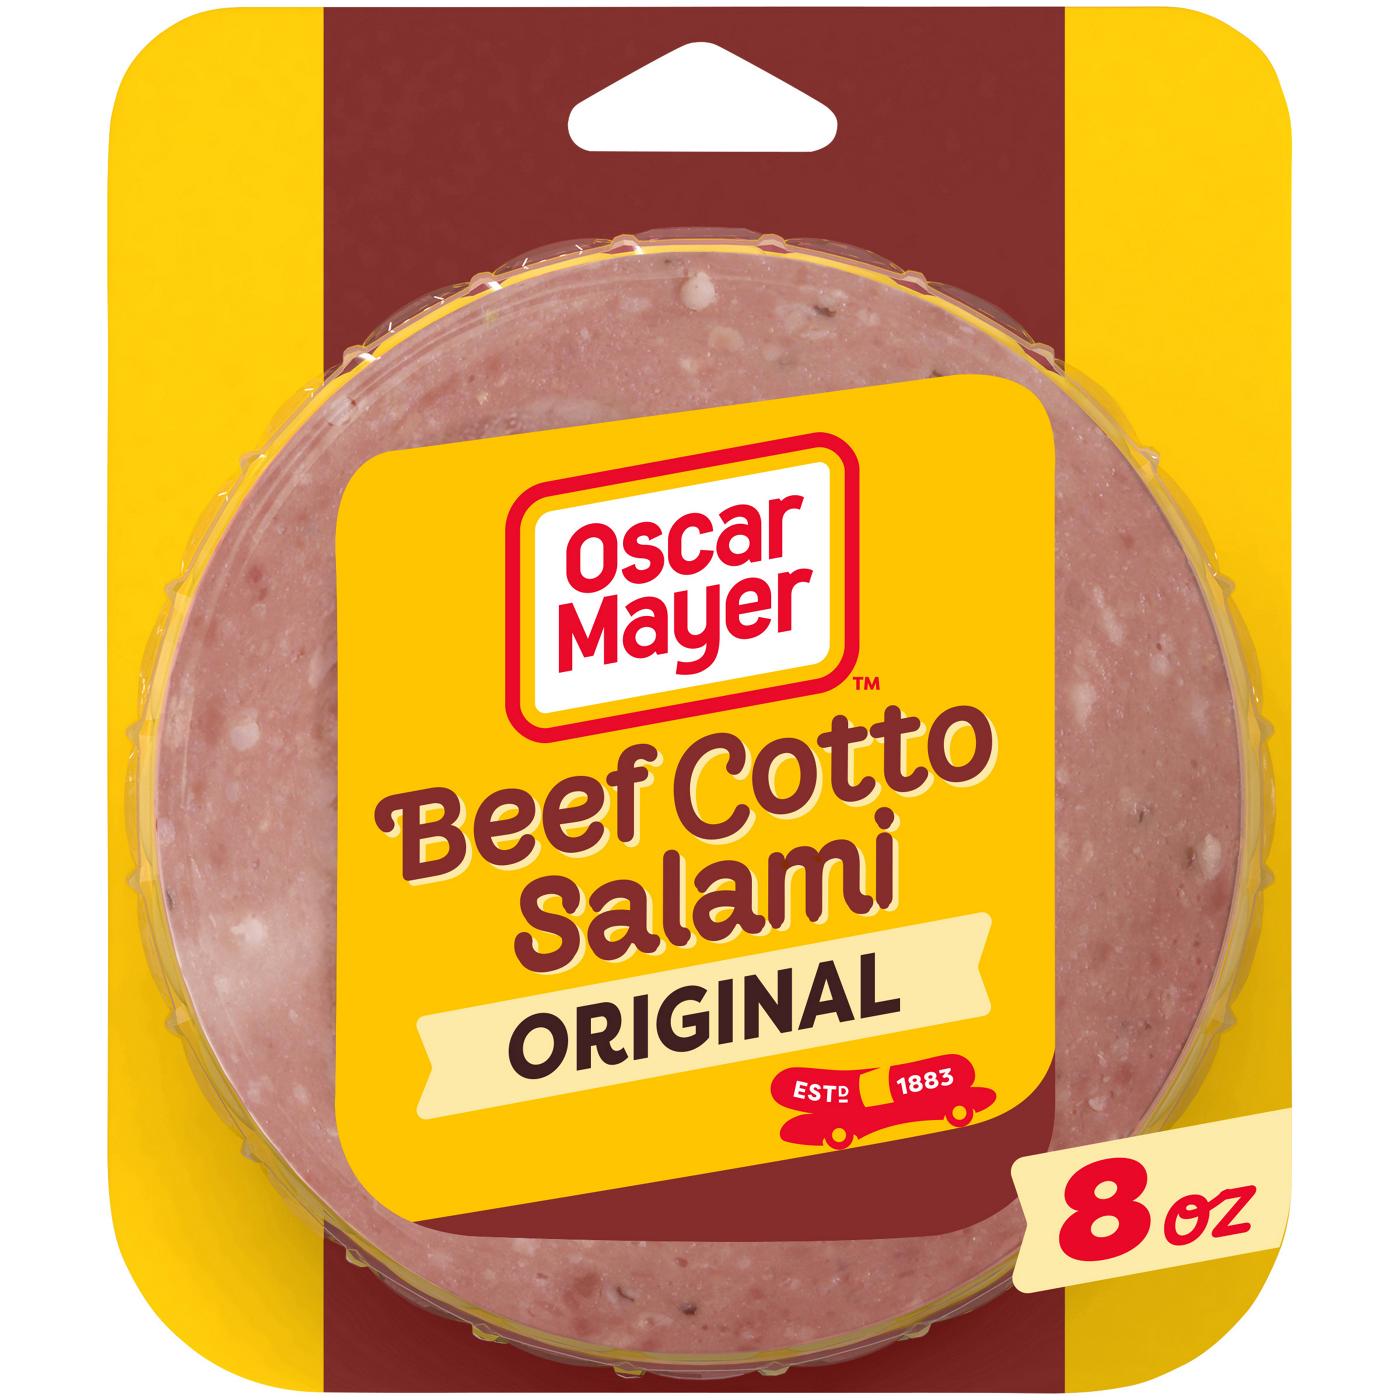 Oscar Mayer Beef Cotto Salami Sliced Lunch Meat; image 1 of 3